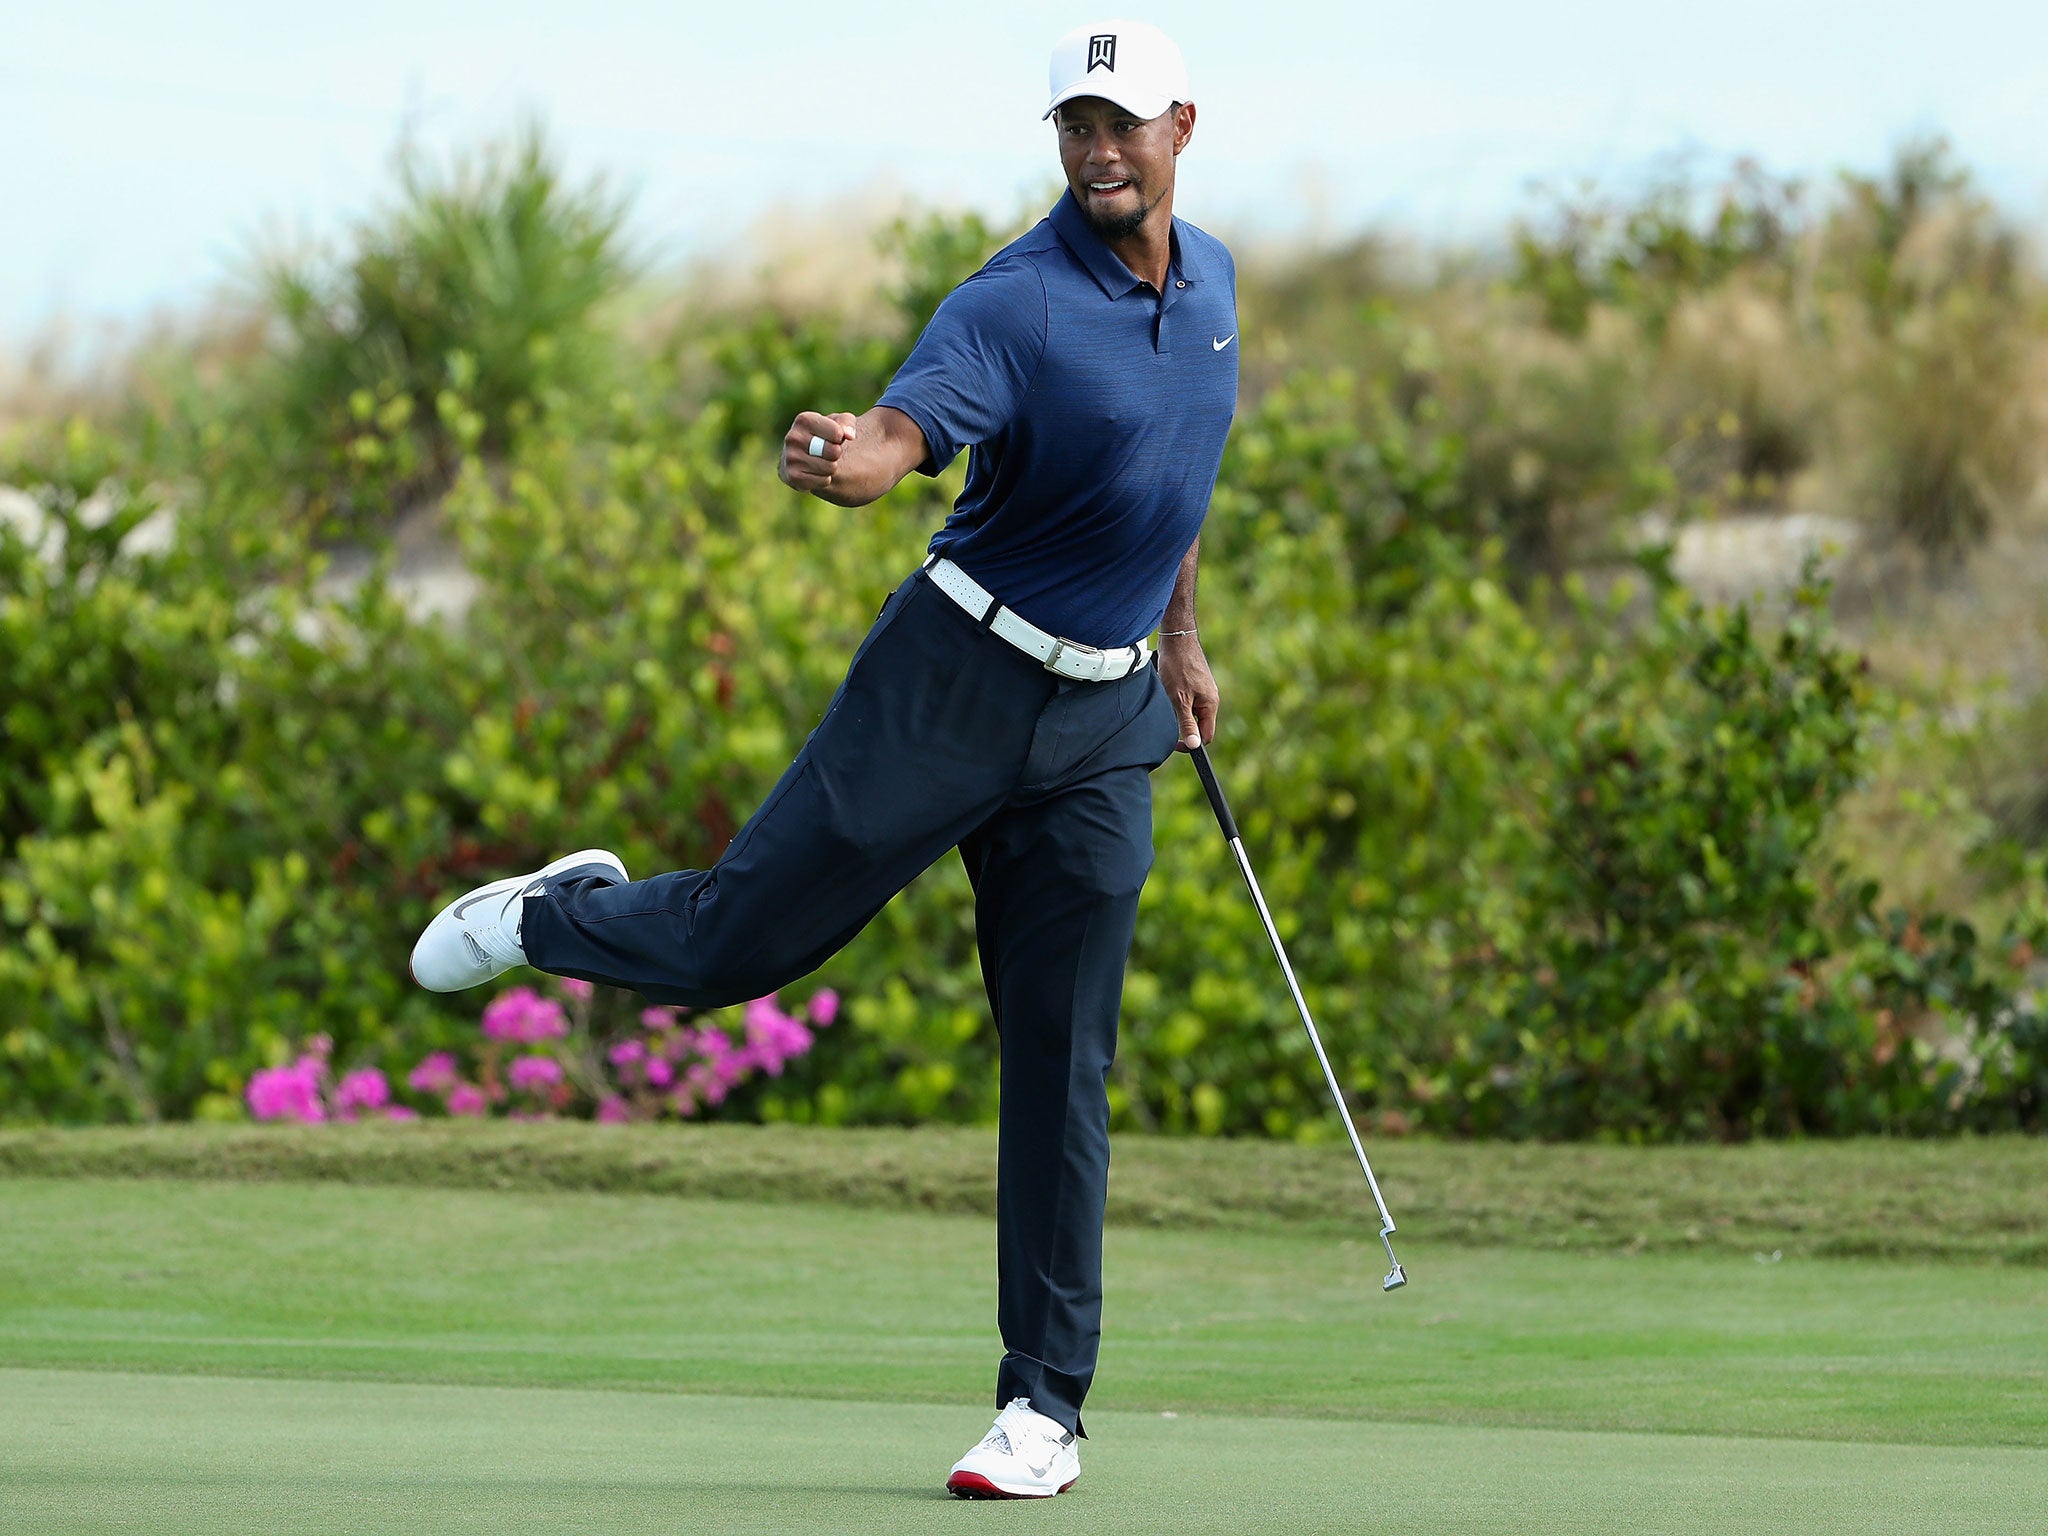 Tiger Woods carded a seven-under-par 65 in just his second round since returning from injury